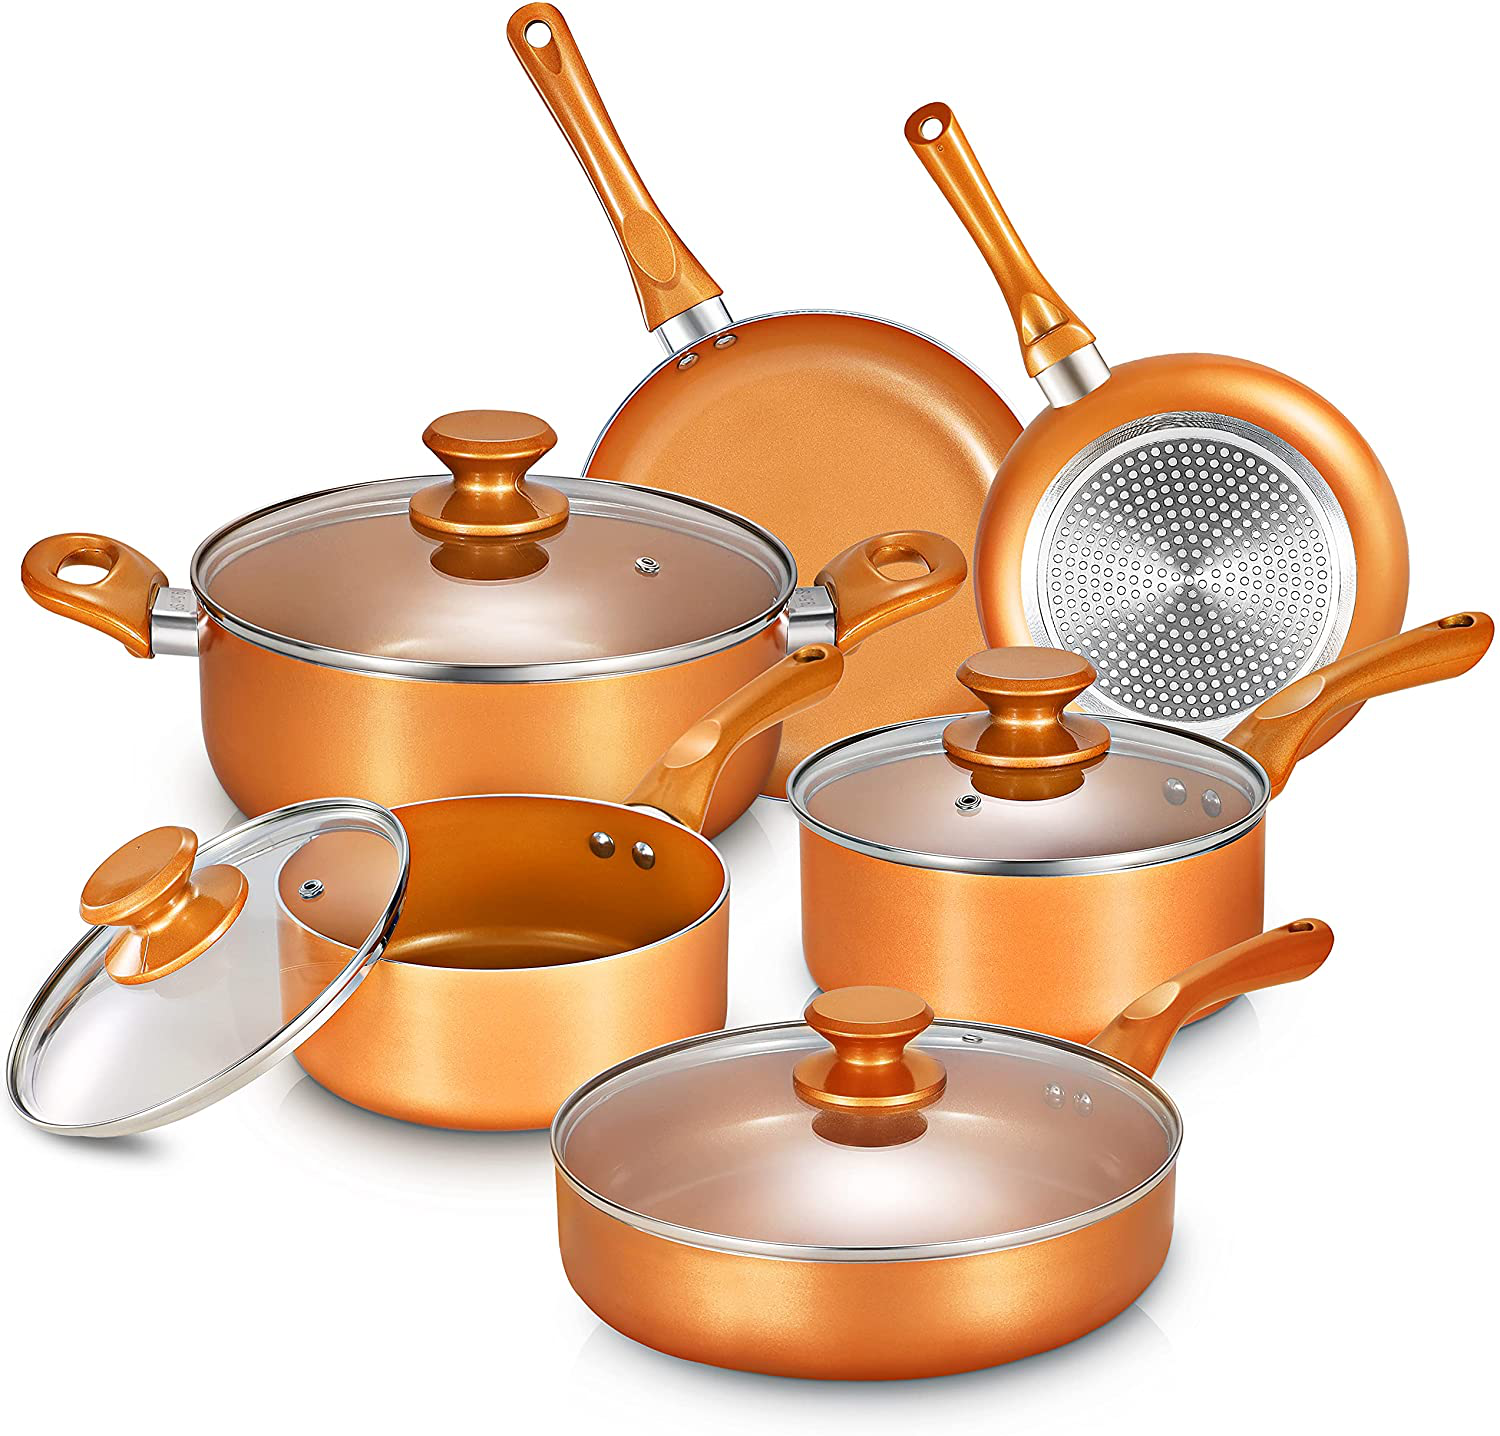 Healthy Nonstick Ceramic Coated Frying Pan - 3 Pcs Eco Friendly Durable Fry Pan  Cookware Set (8, 10 & 11 Pans) (Copper Stainless Steel) 